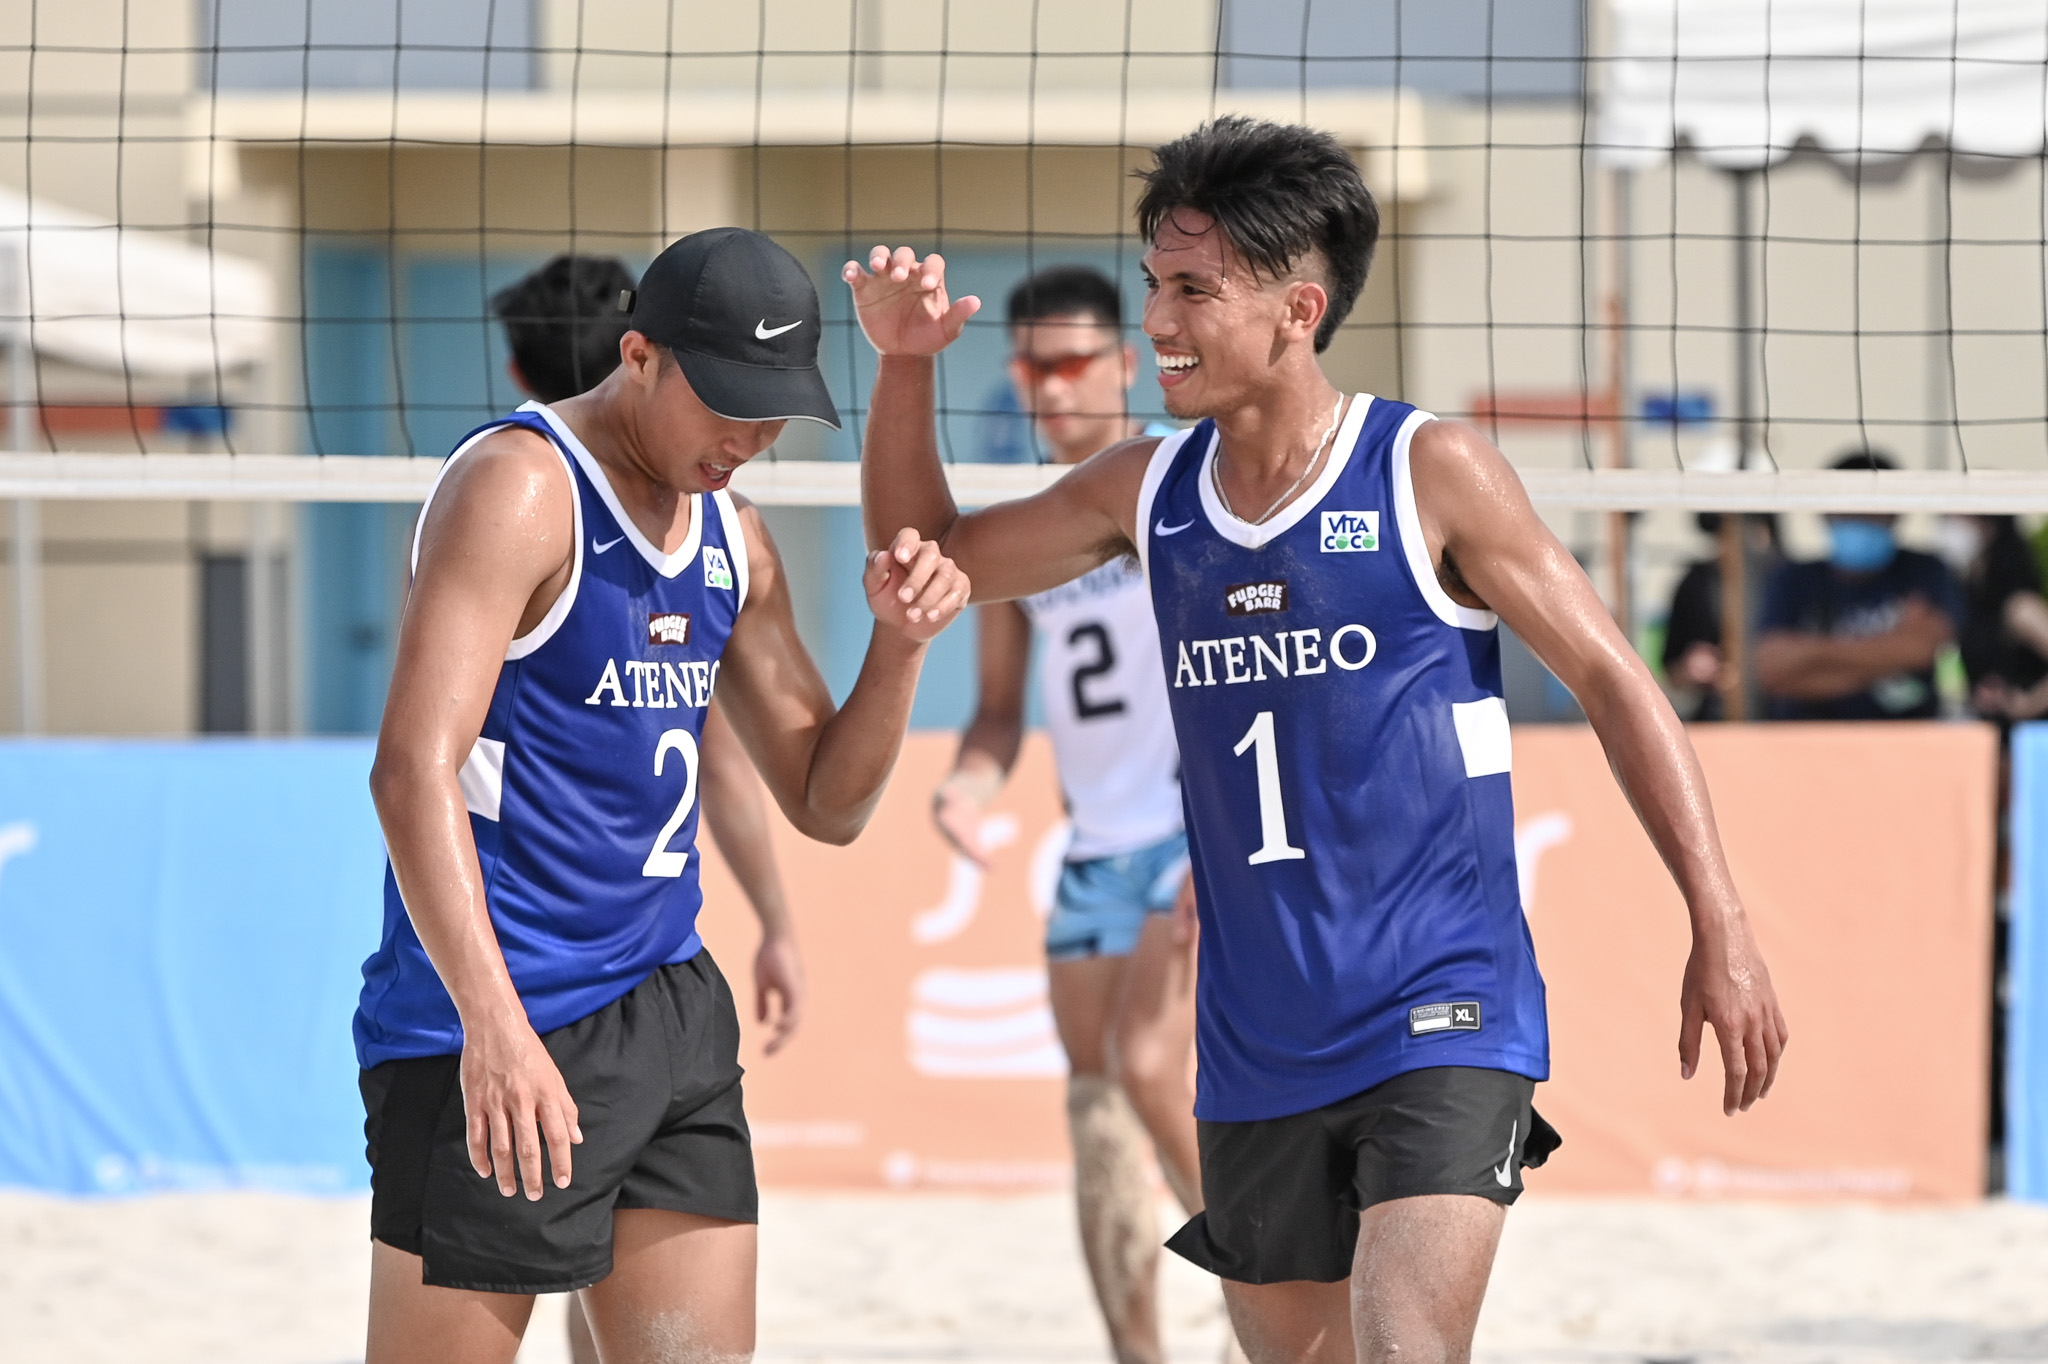 1st-Photo-Abay-Llenos-Amil-Pacinio-ADMU UAAP 84: NU's Buytrago-Salvador outlasts UST as La Salle, Ateneo take early lead ADMU AdU Beach Volleyball DLSU FEU News NU UAAP UP UST  - philippine sports news